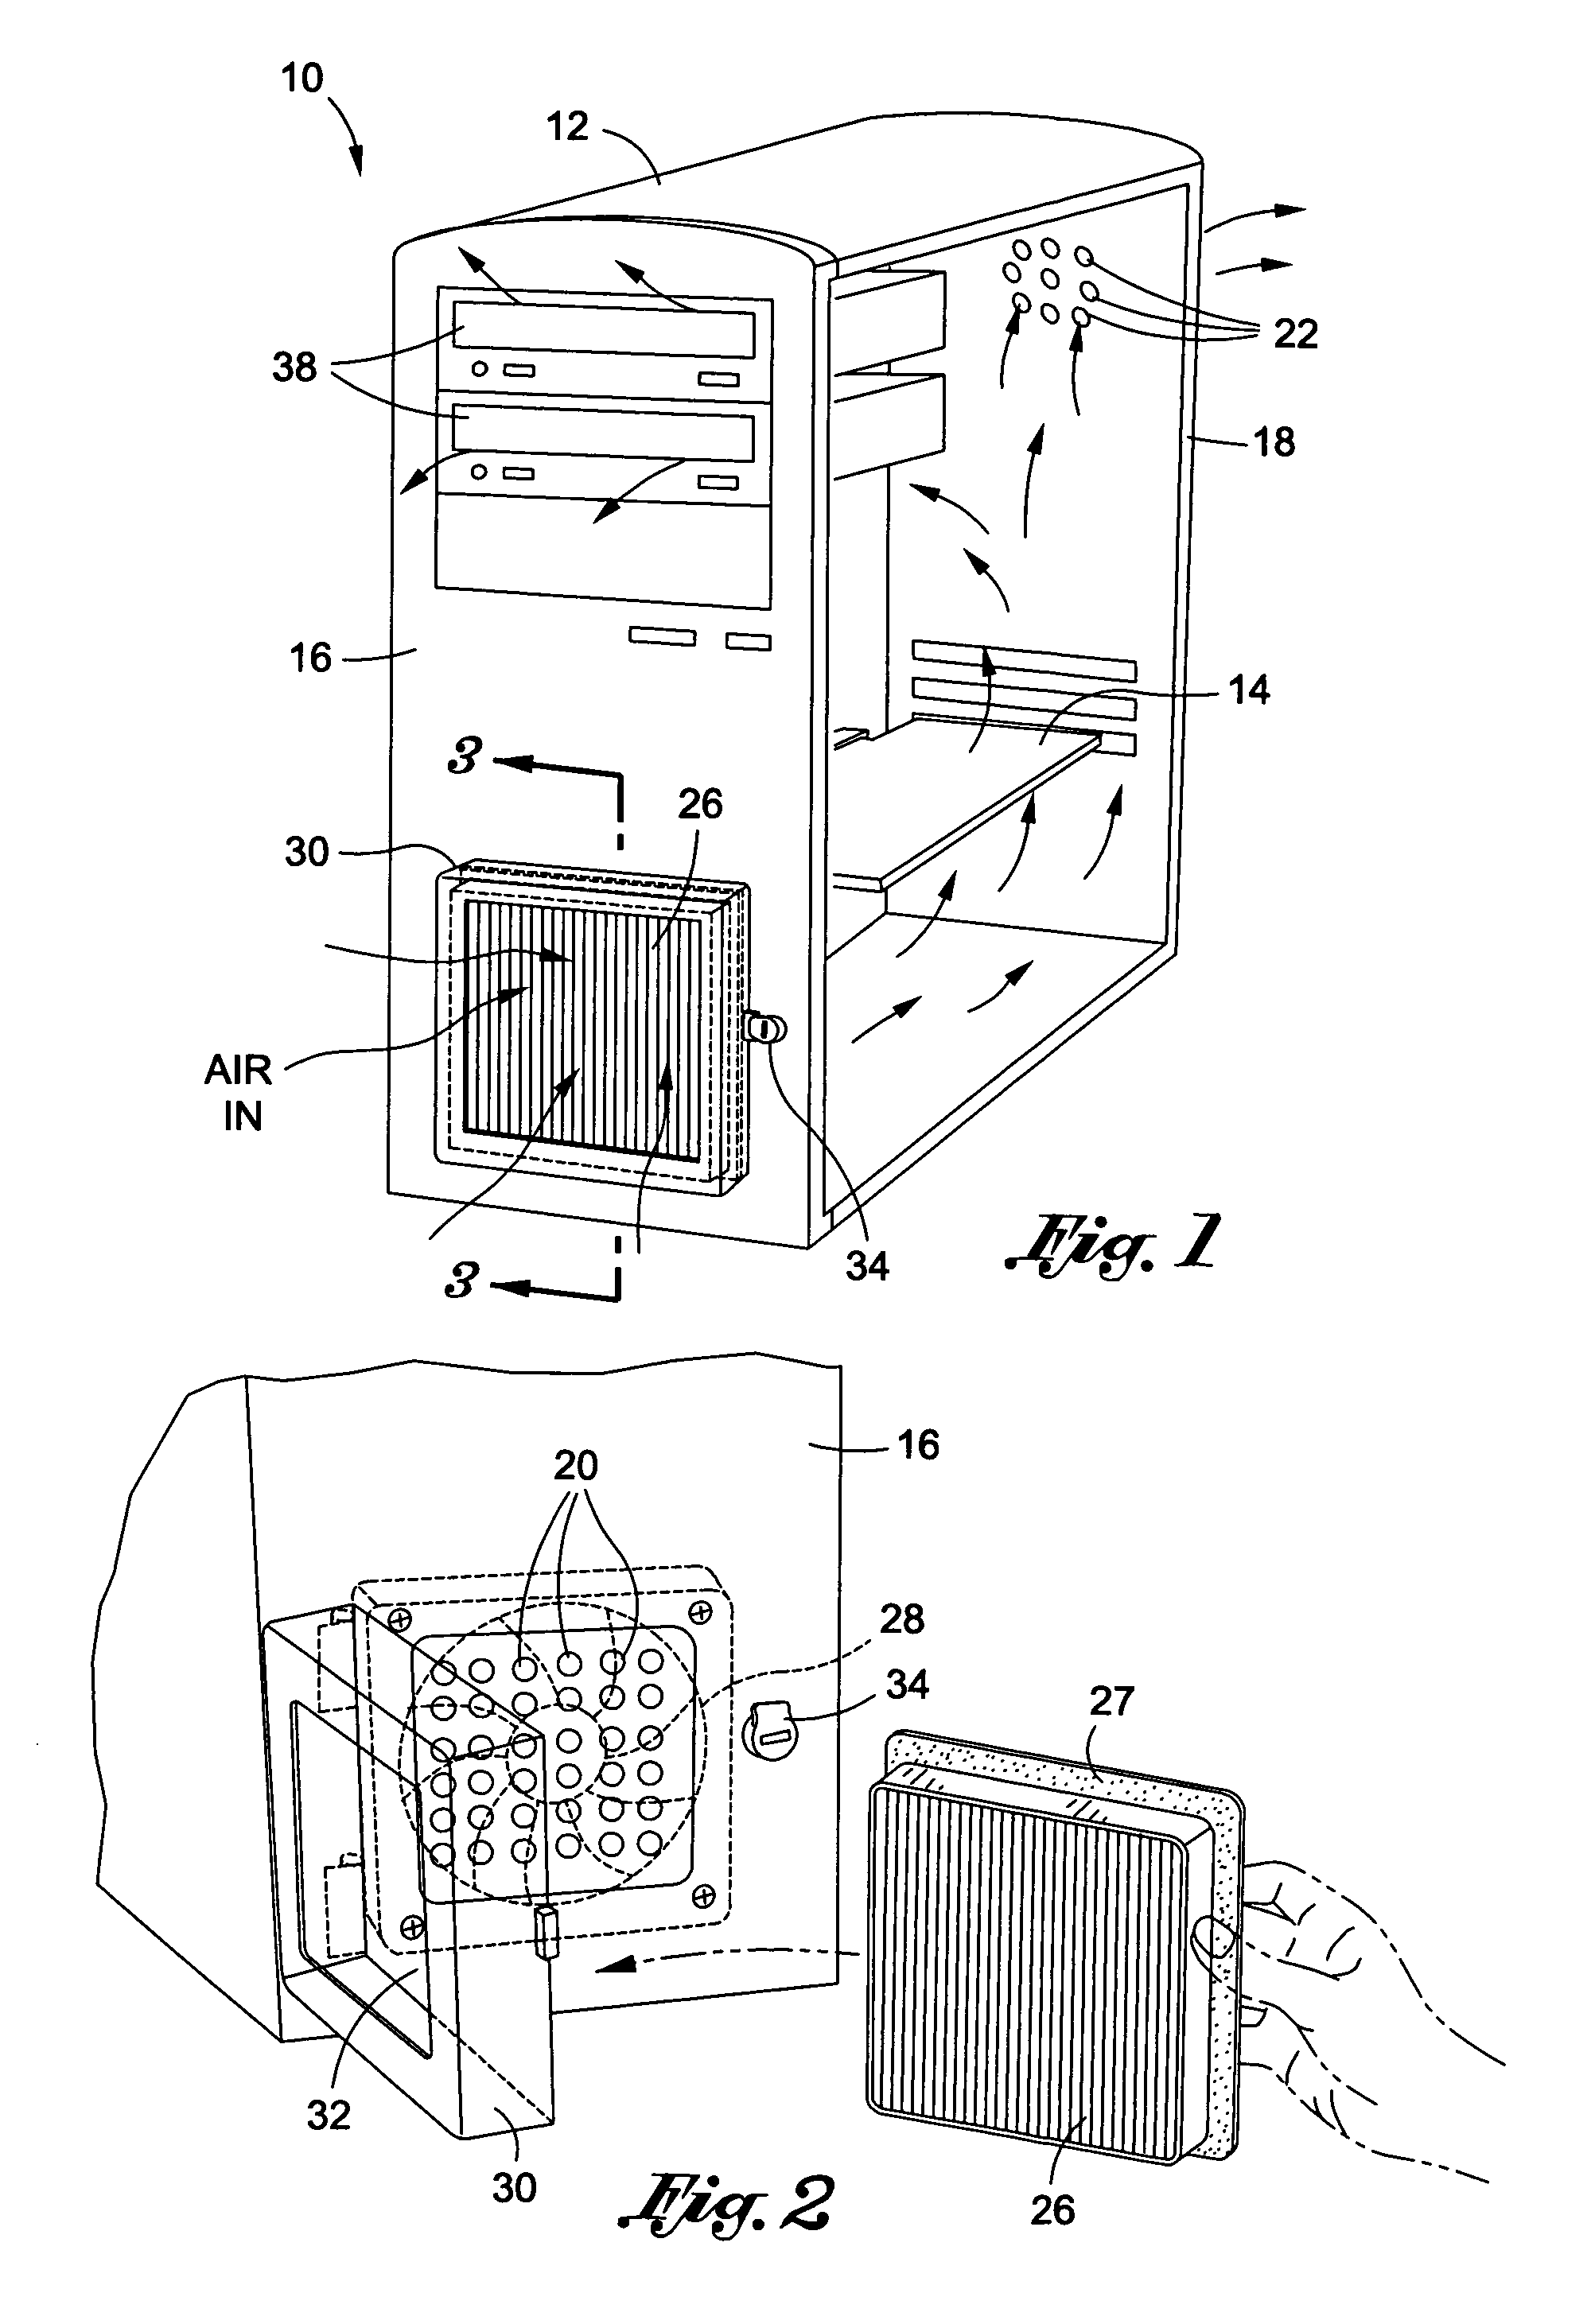 Computer case with intake filter with positive airflow